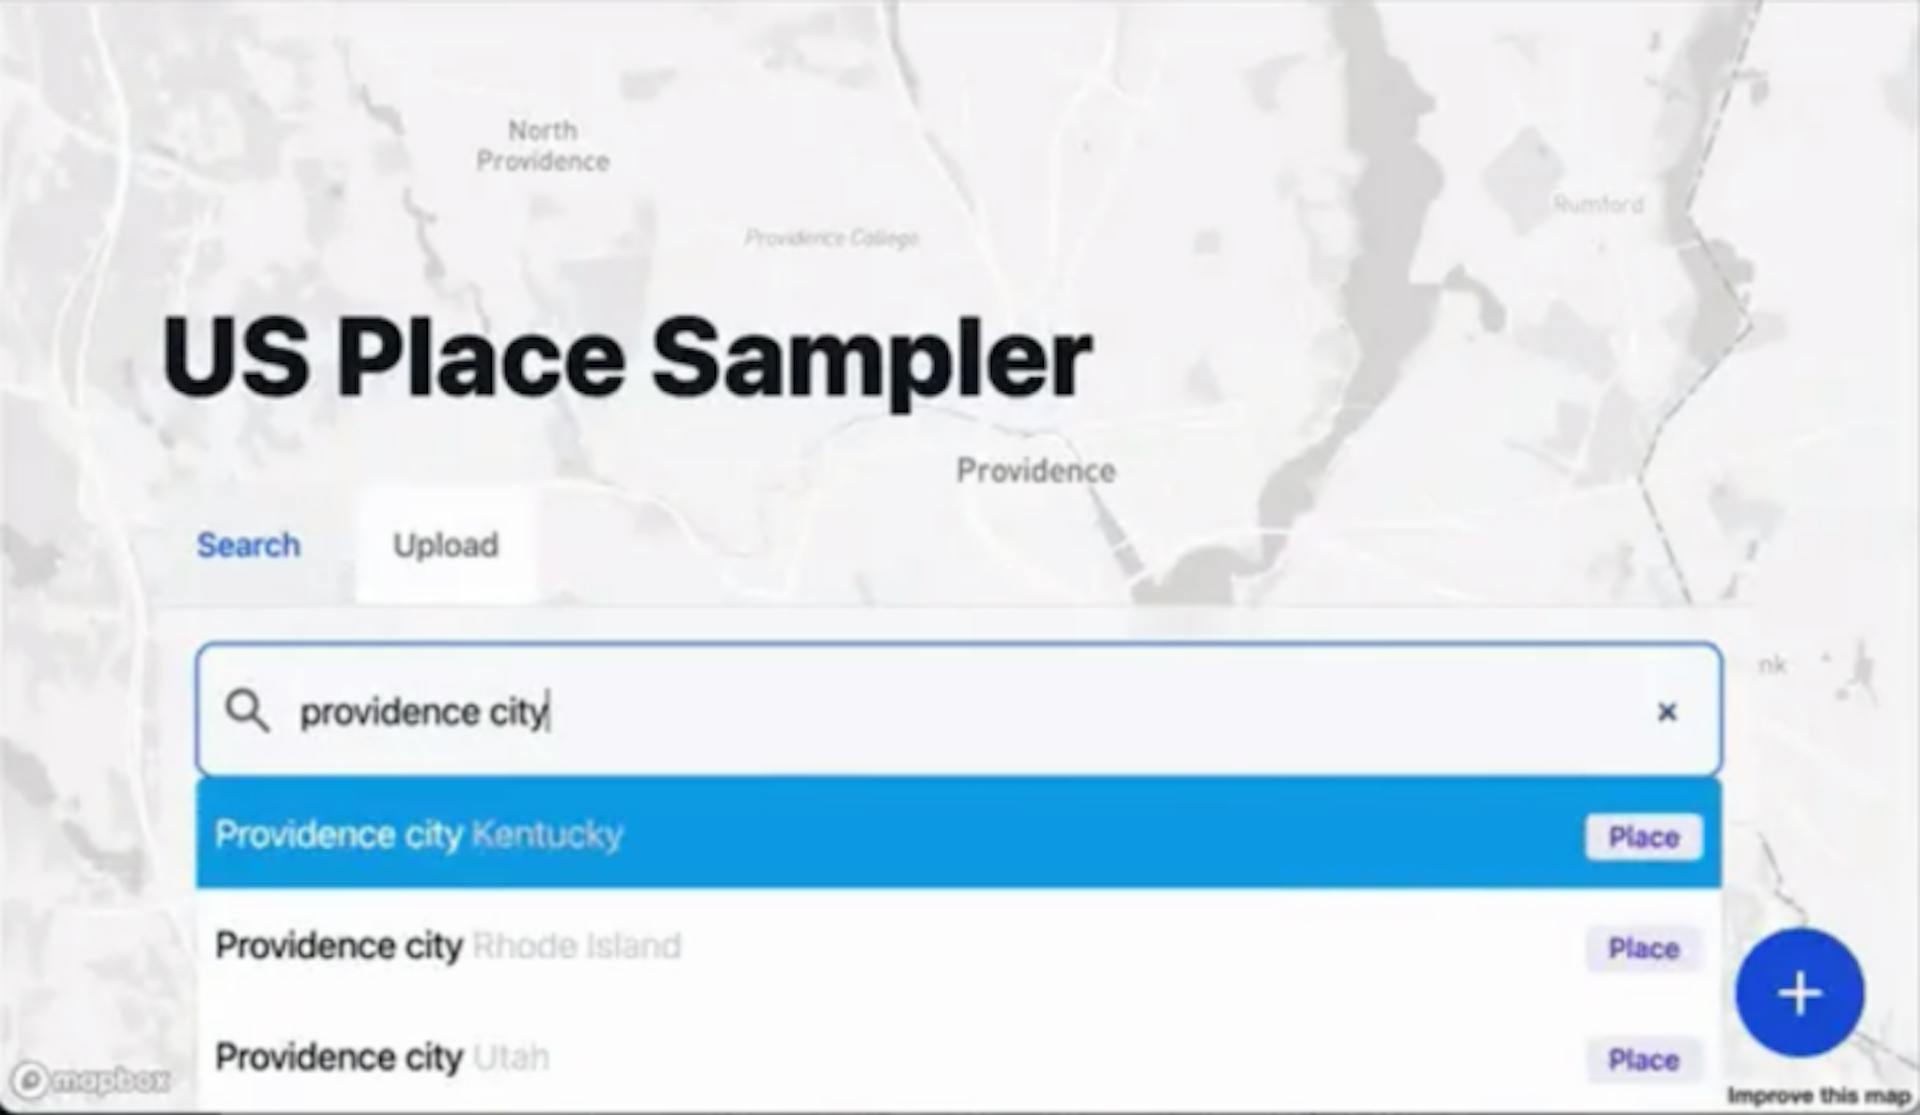 Downloading a sample of 300 random addresses from Providence, R.I., using USPS. The tool does not differentiate between residential or commercial addresses. In our experience, that distinction is often made on an ISP’s website when you search for plans. Source: Big Local News, The Markup